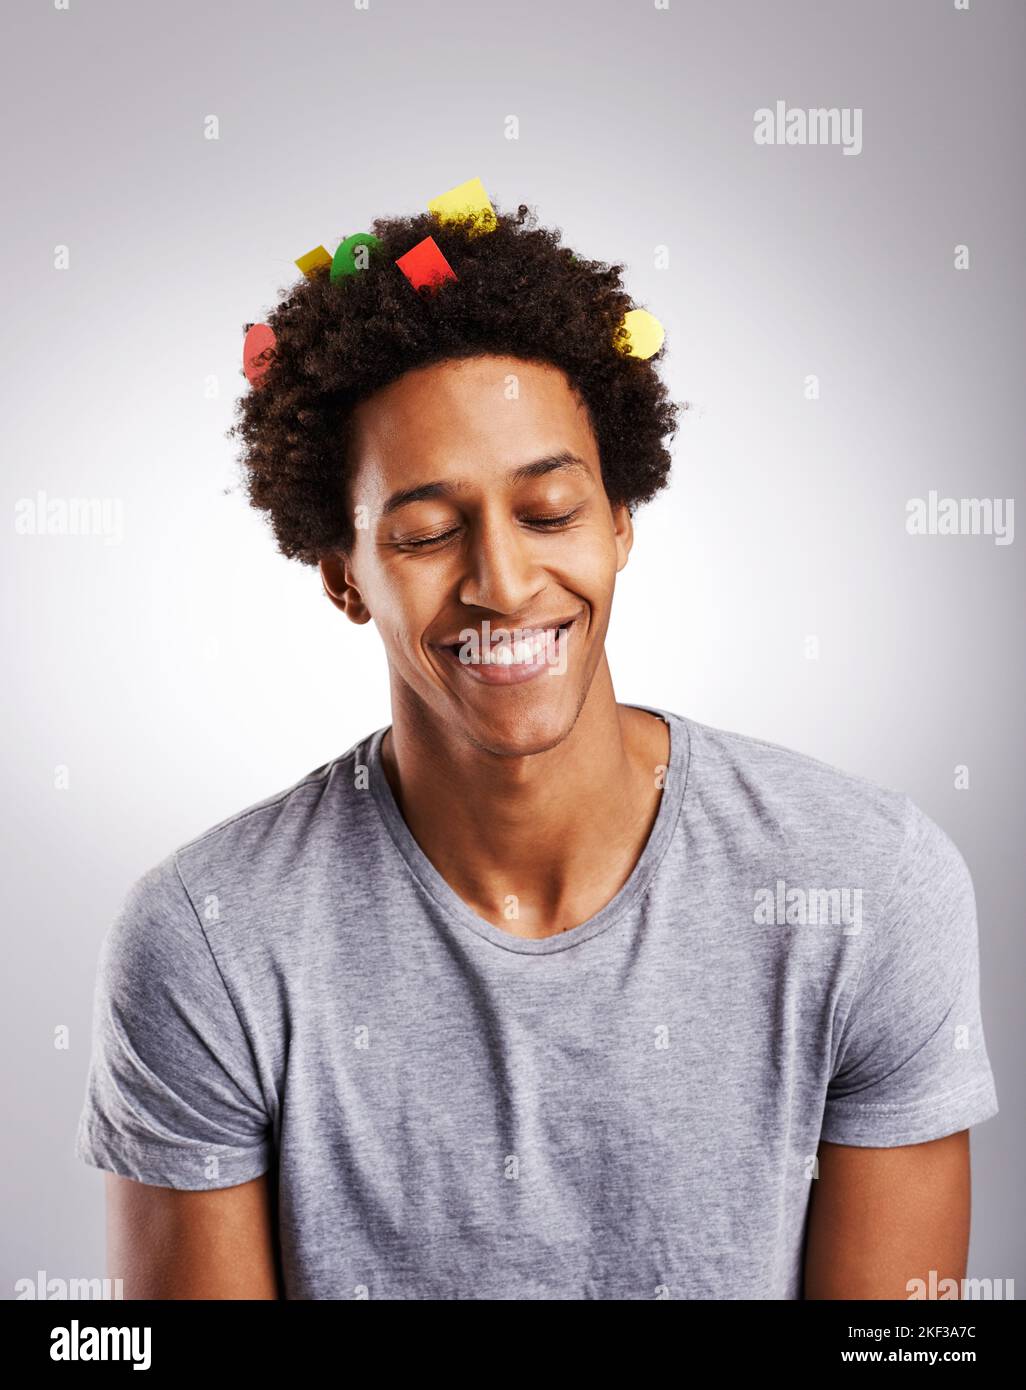 I just love colorful hair...a young man with colorful paper in his hair against a gray background. Stock Photo